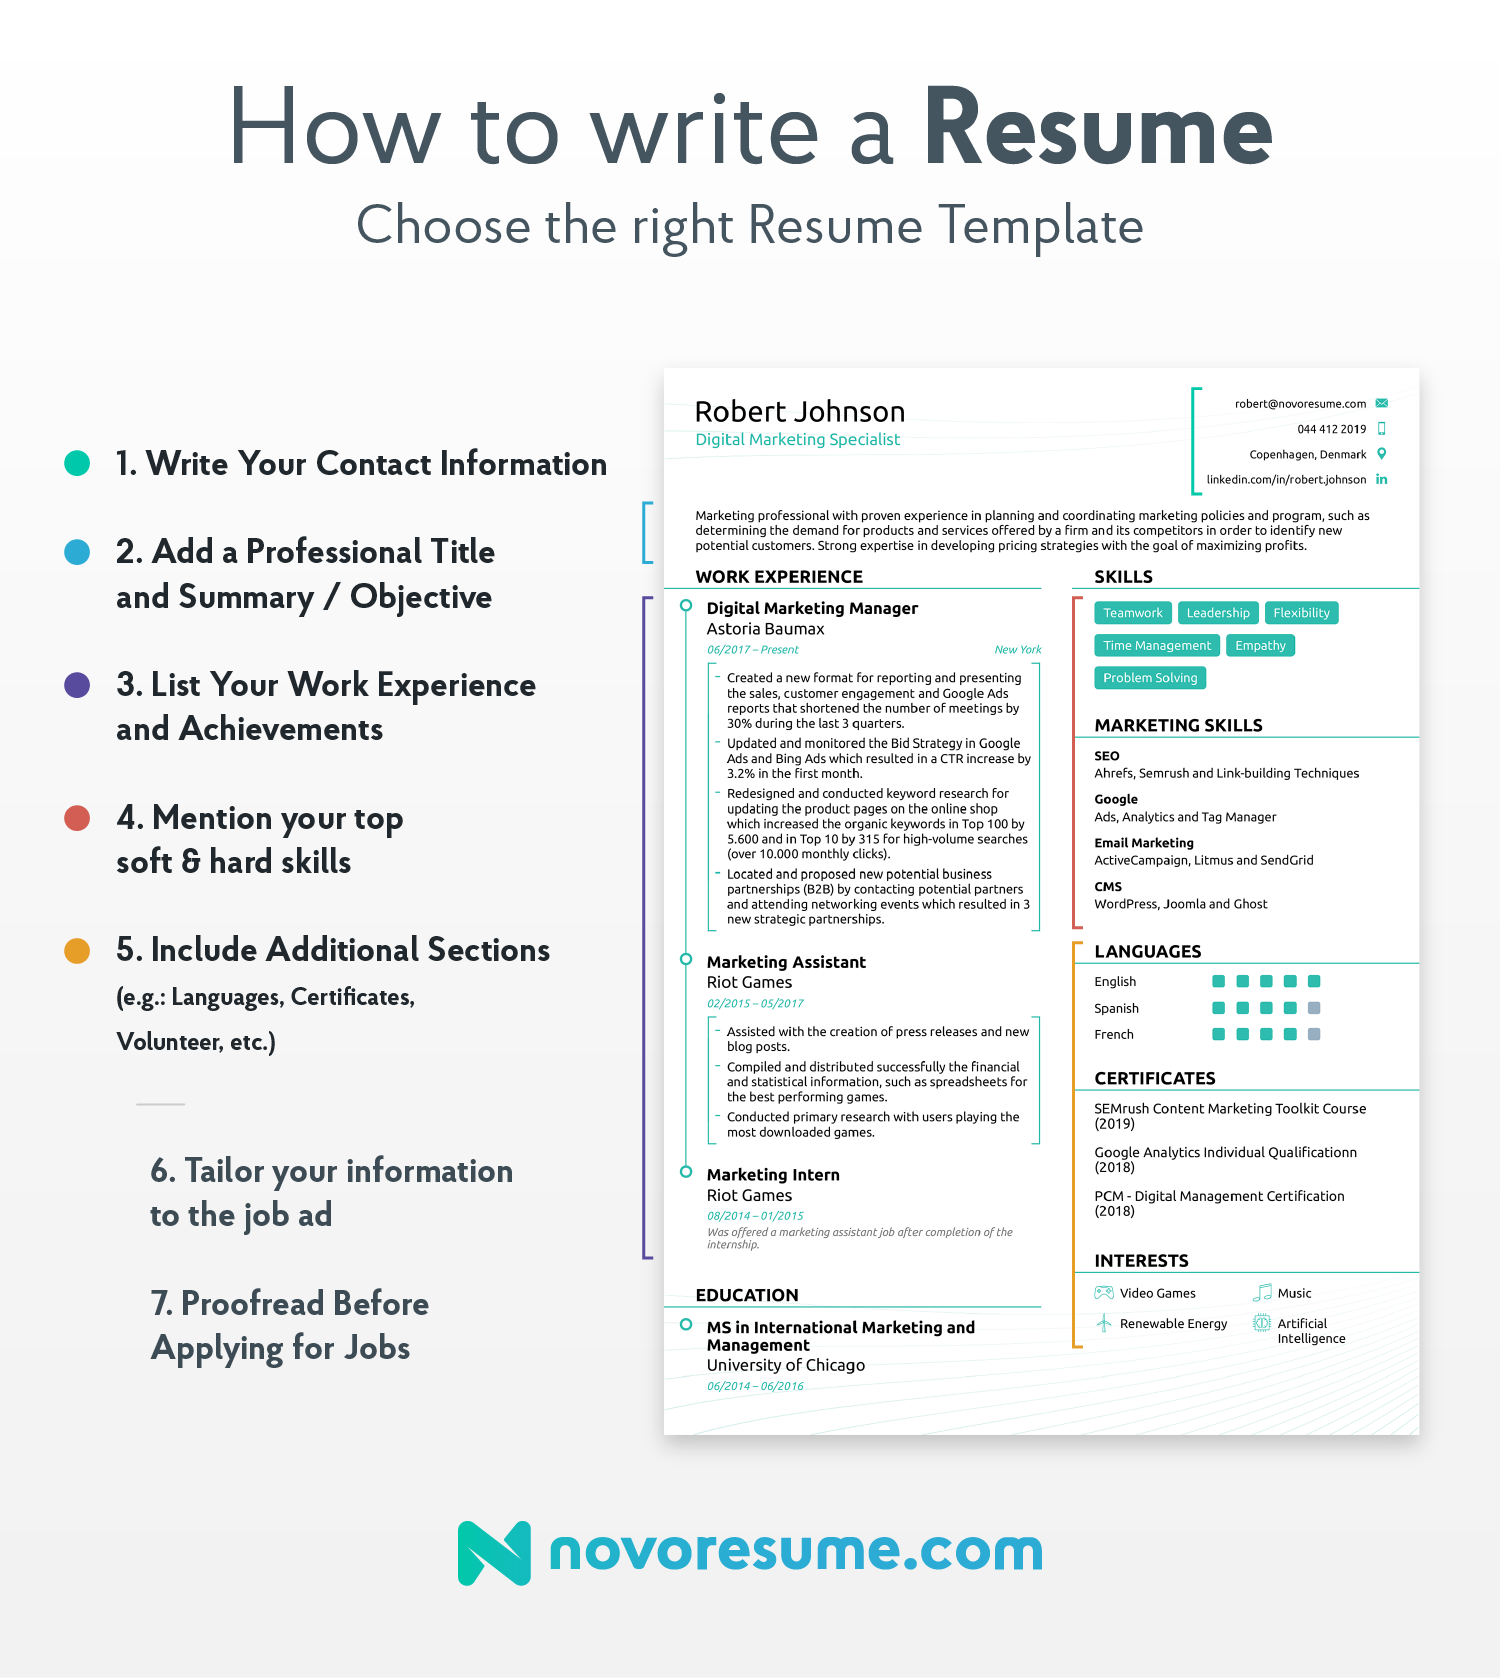 9 Easy Ways To resume Without Even Thinking About It